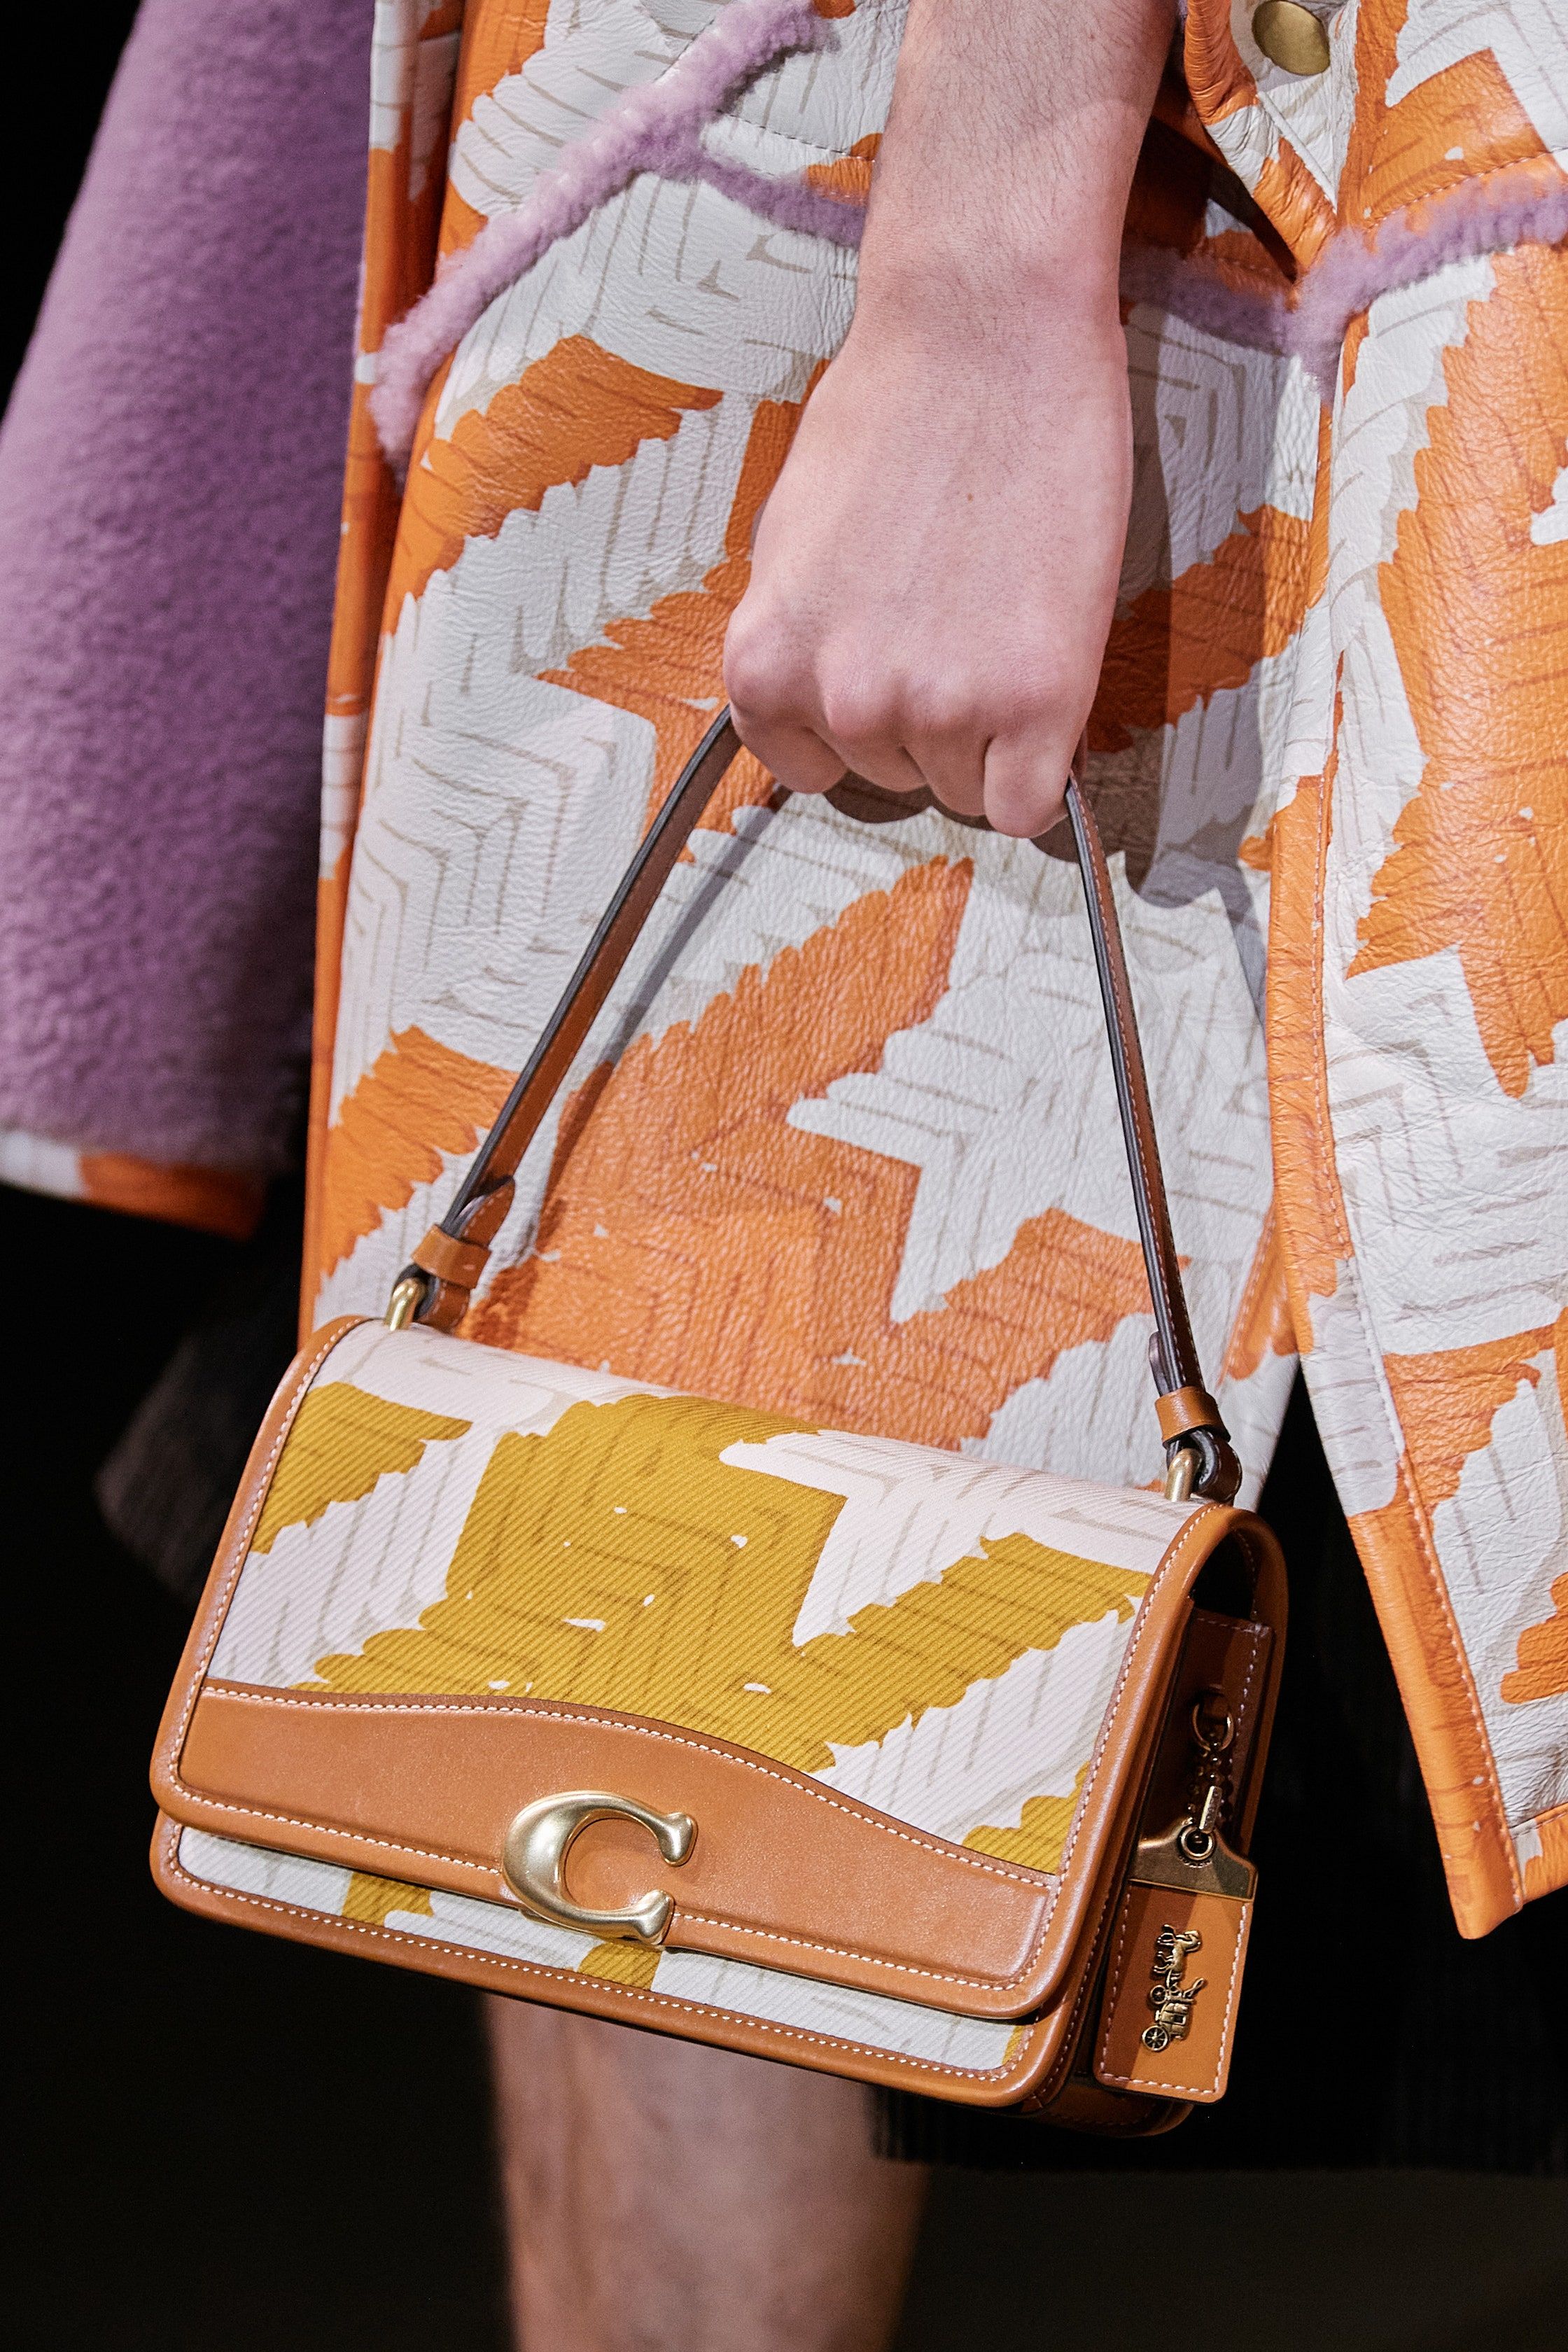 The Most Important F/W 2022 Bag Trends